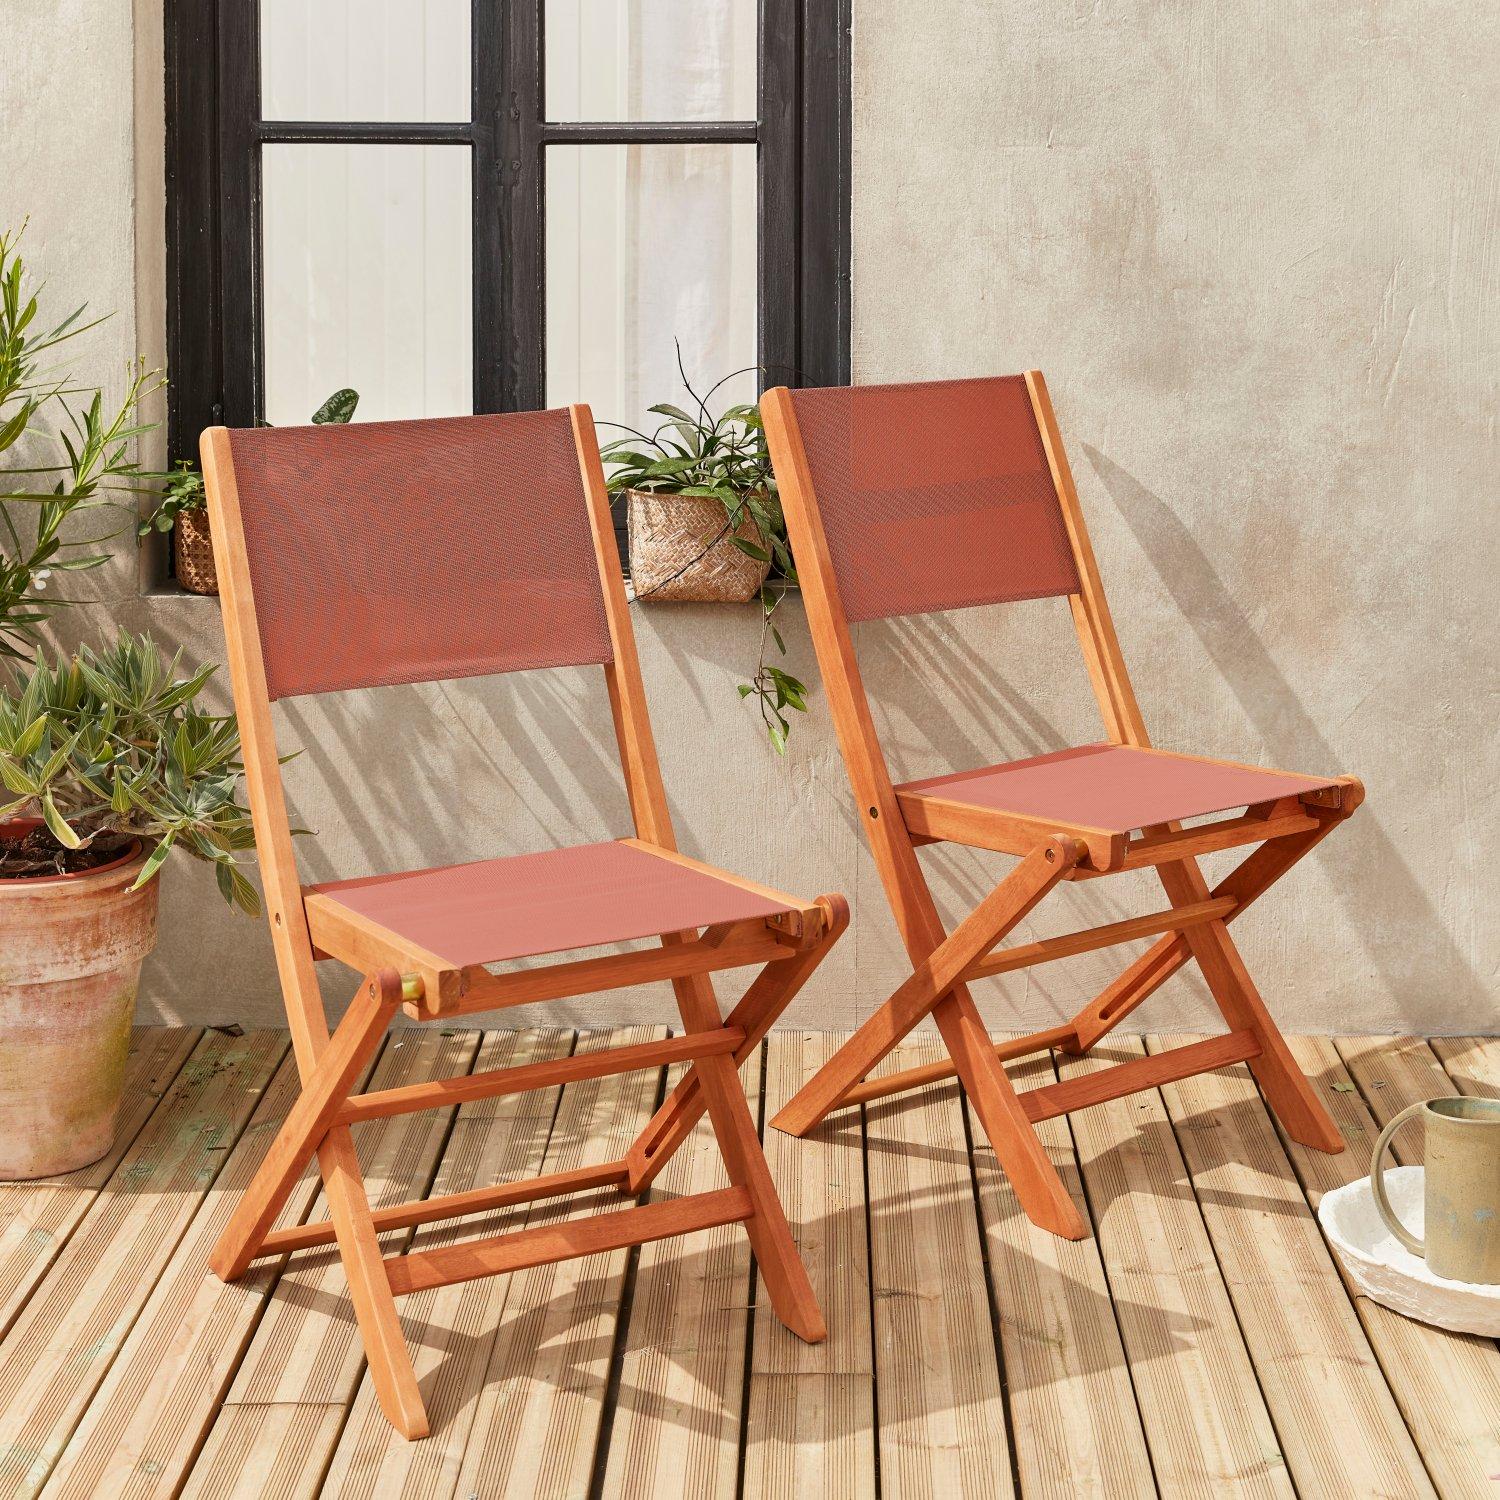 Pair Of Foldable Wooden Garden Chairs